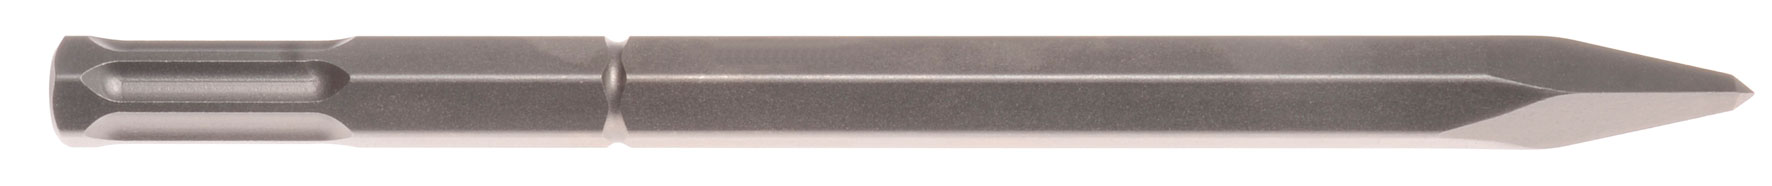 Pointed chisel Shank 22 mm hex with 6 slots